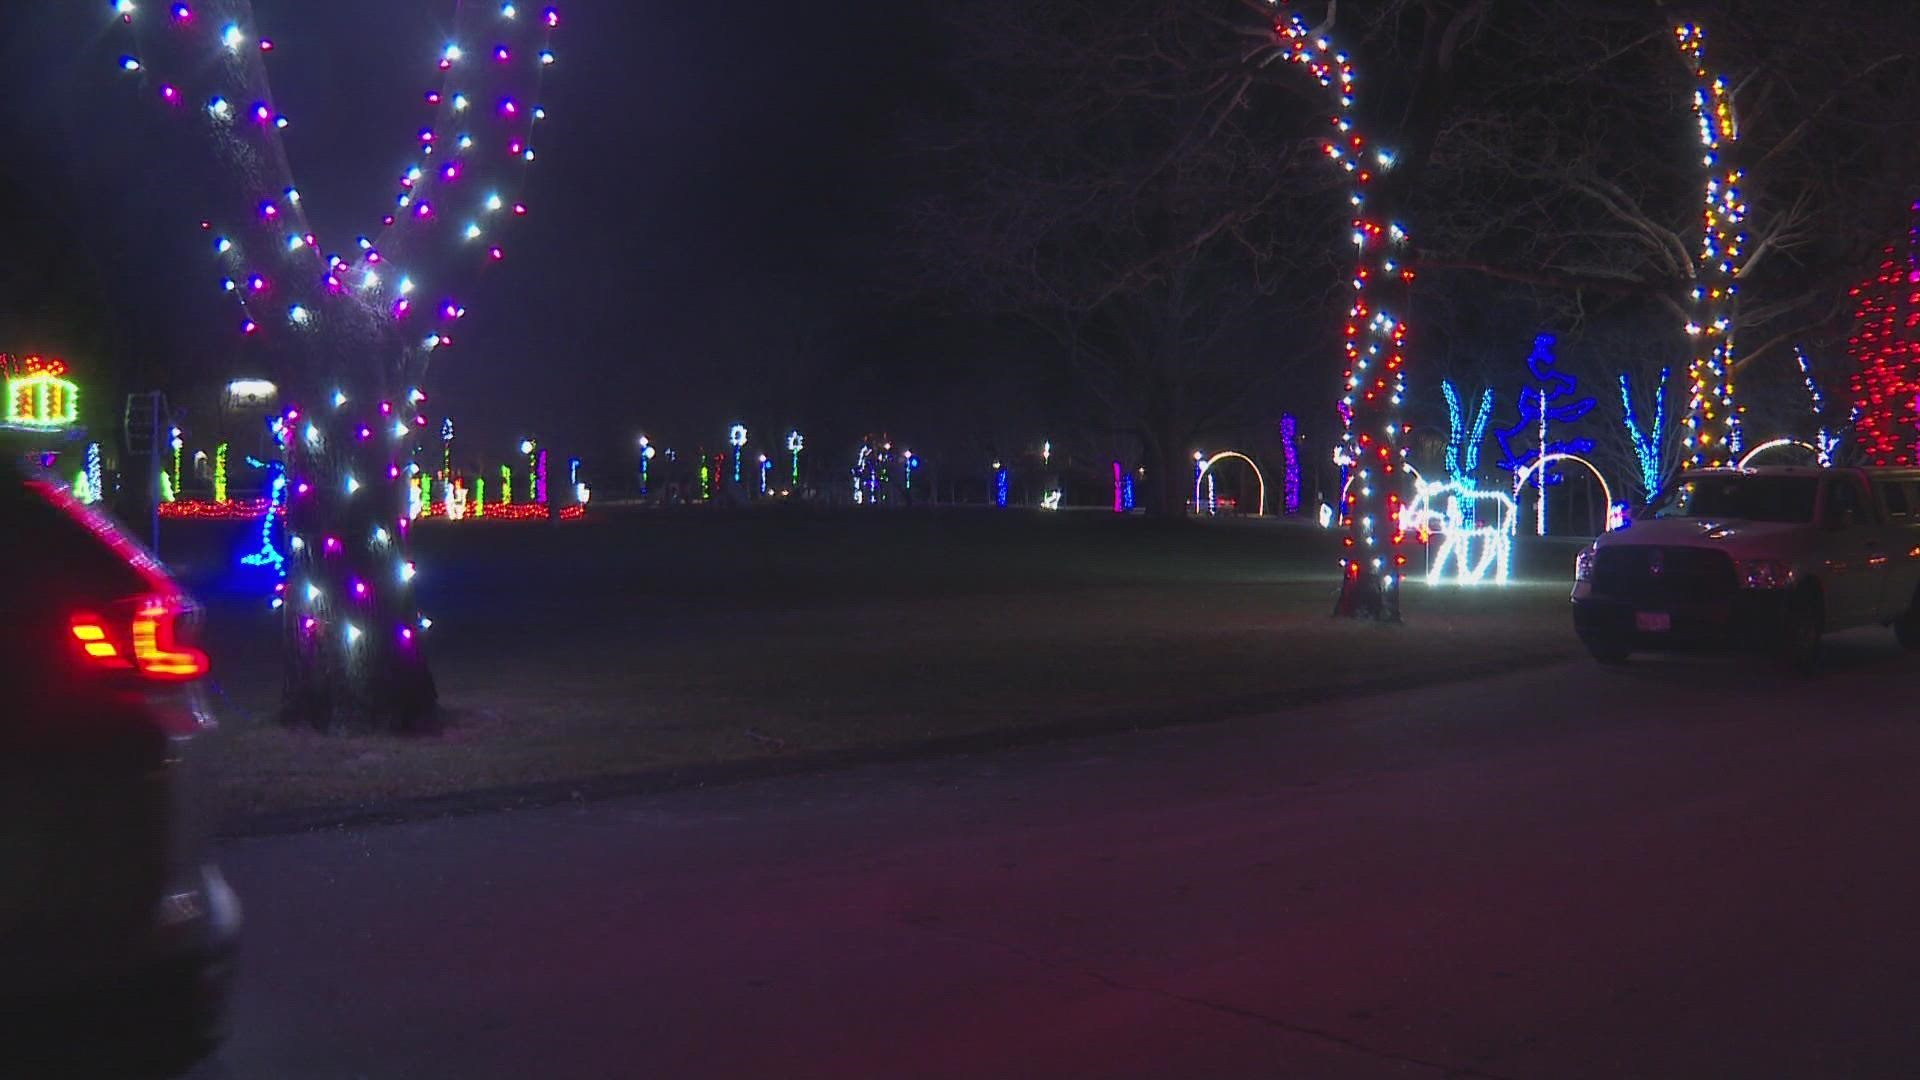 The city public services department expanded the displays in Riverbank Park and on Main Street after positive feedback in 2020 and 2021.